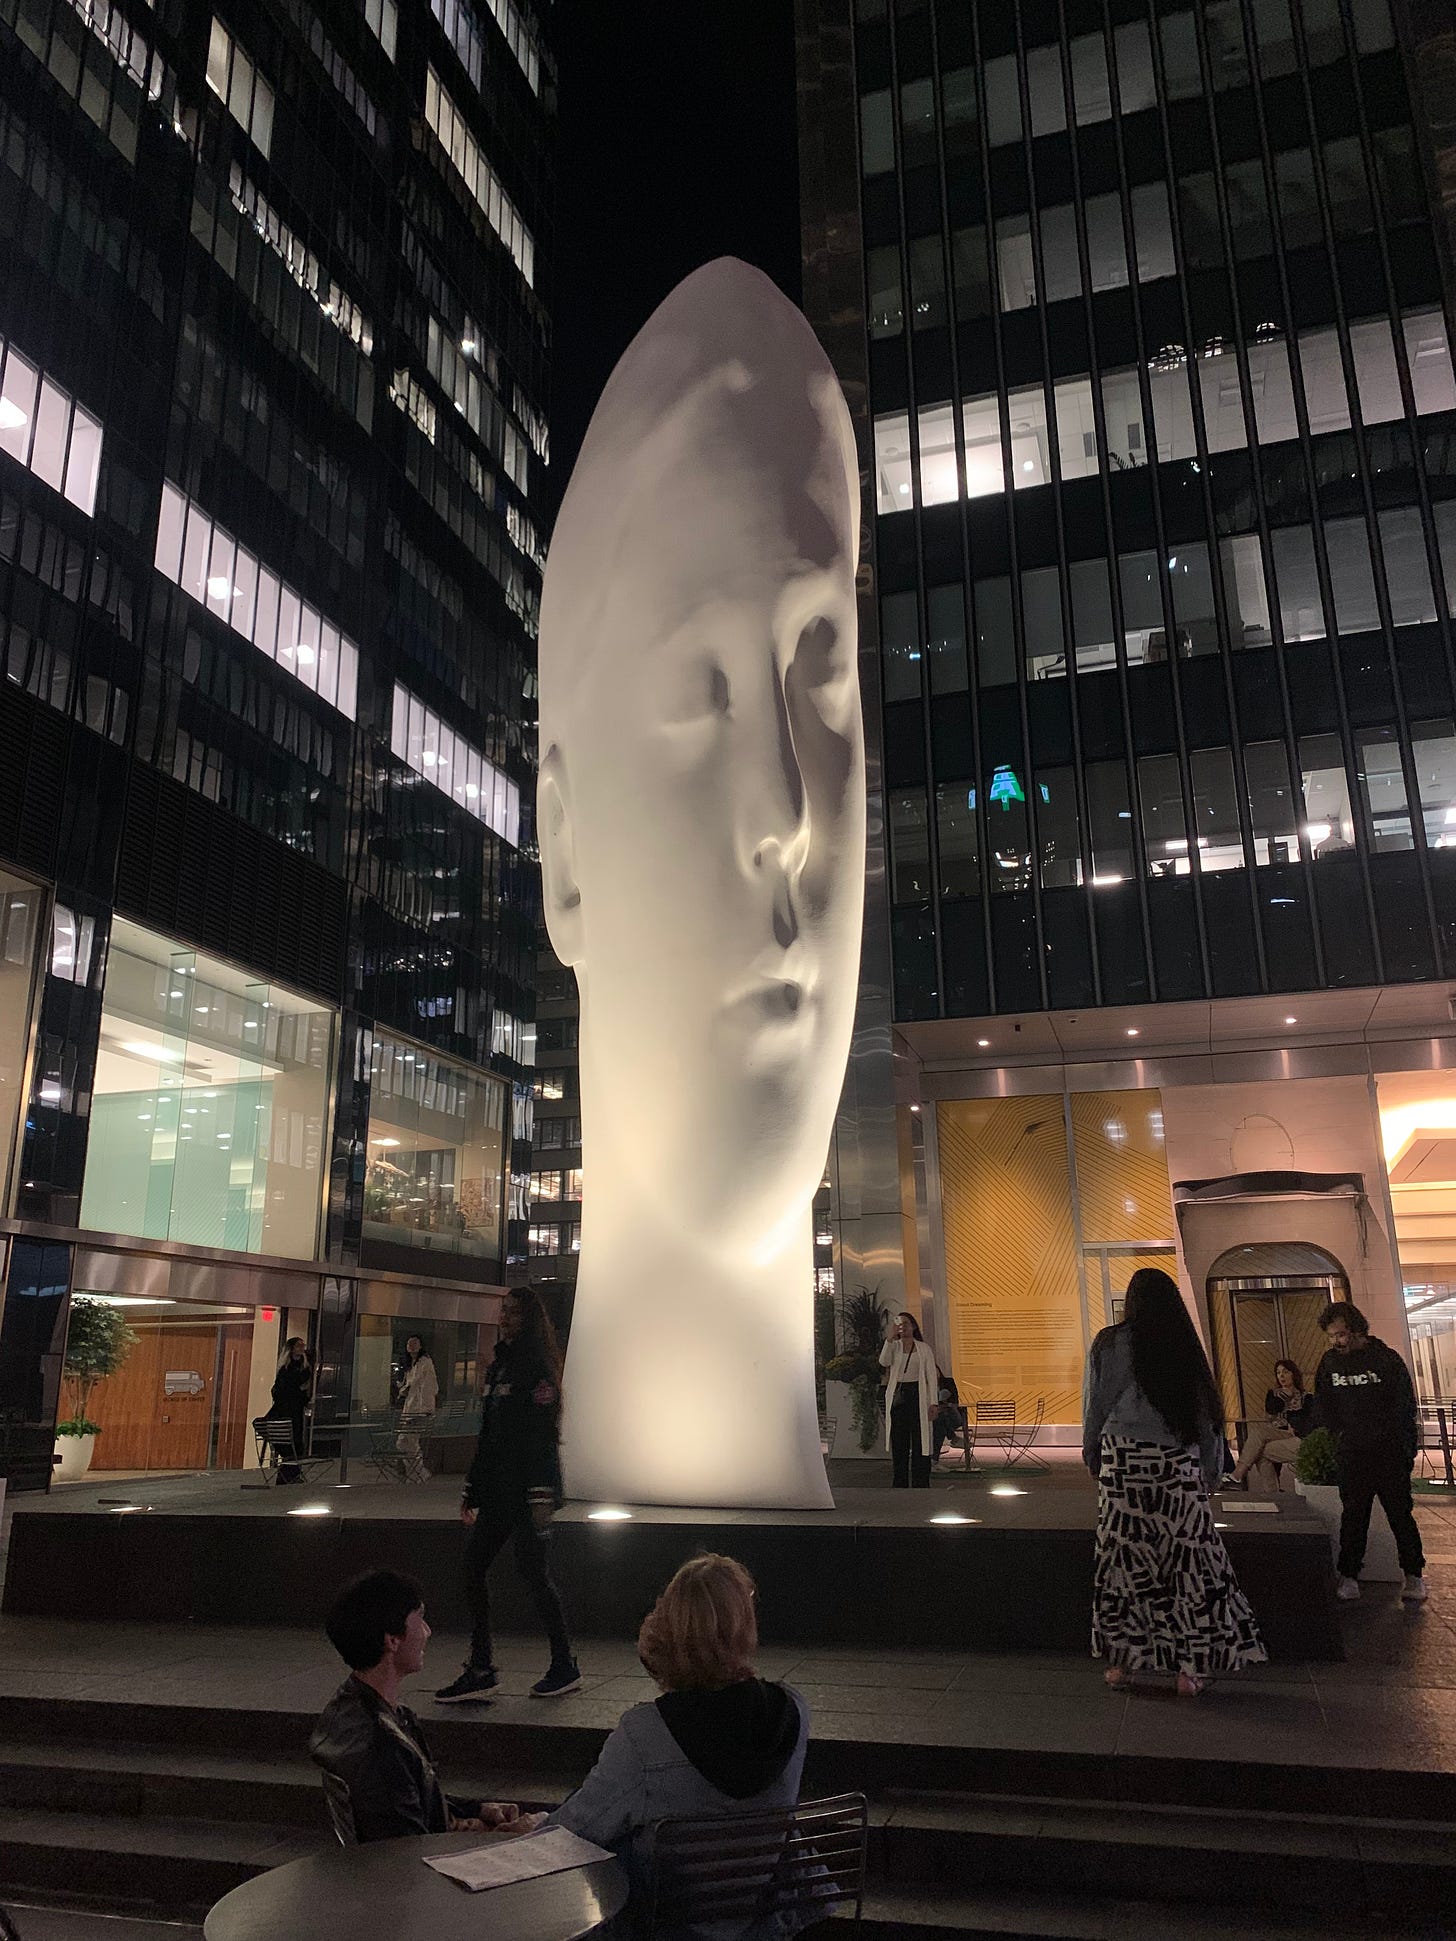 A sculpture of an elongated white head stretching up into the night sky.